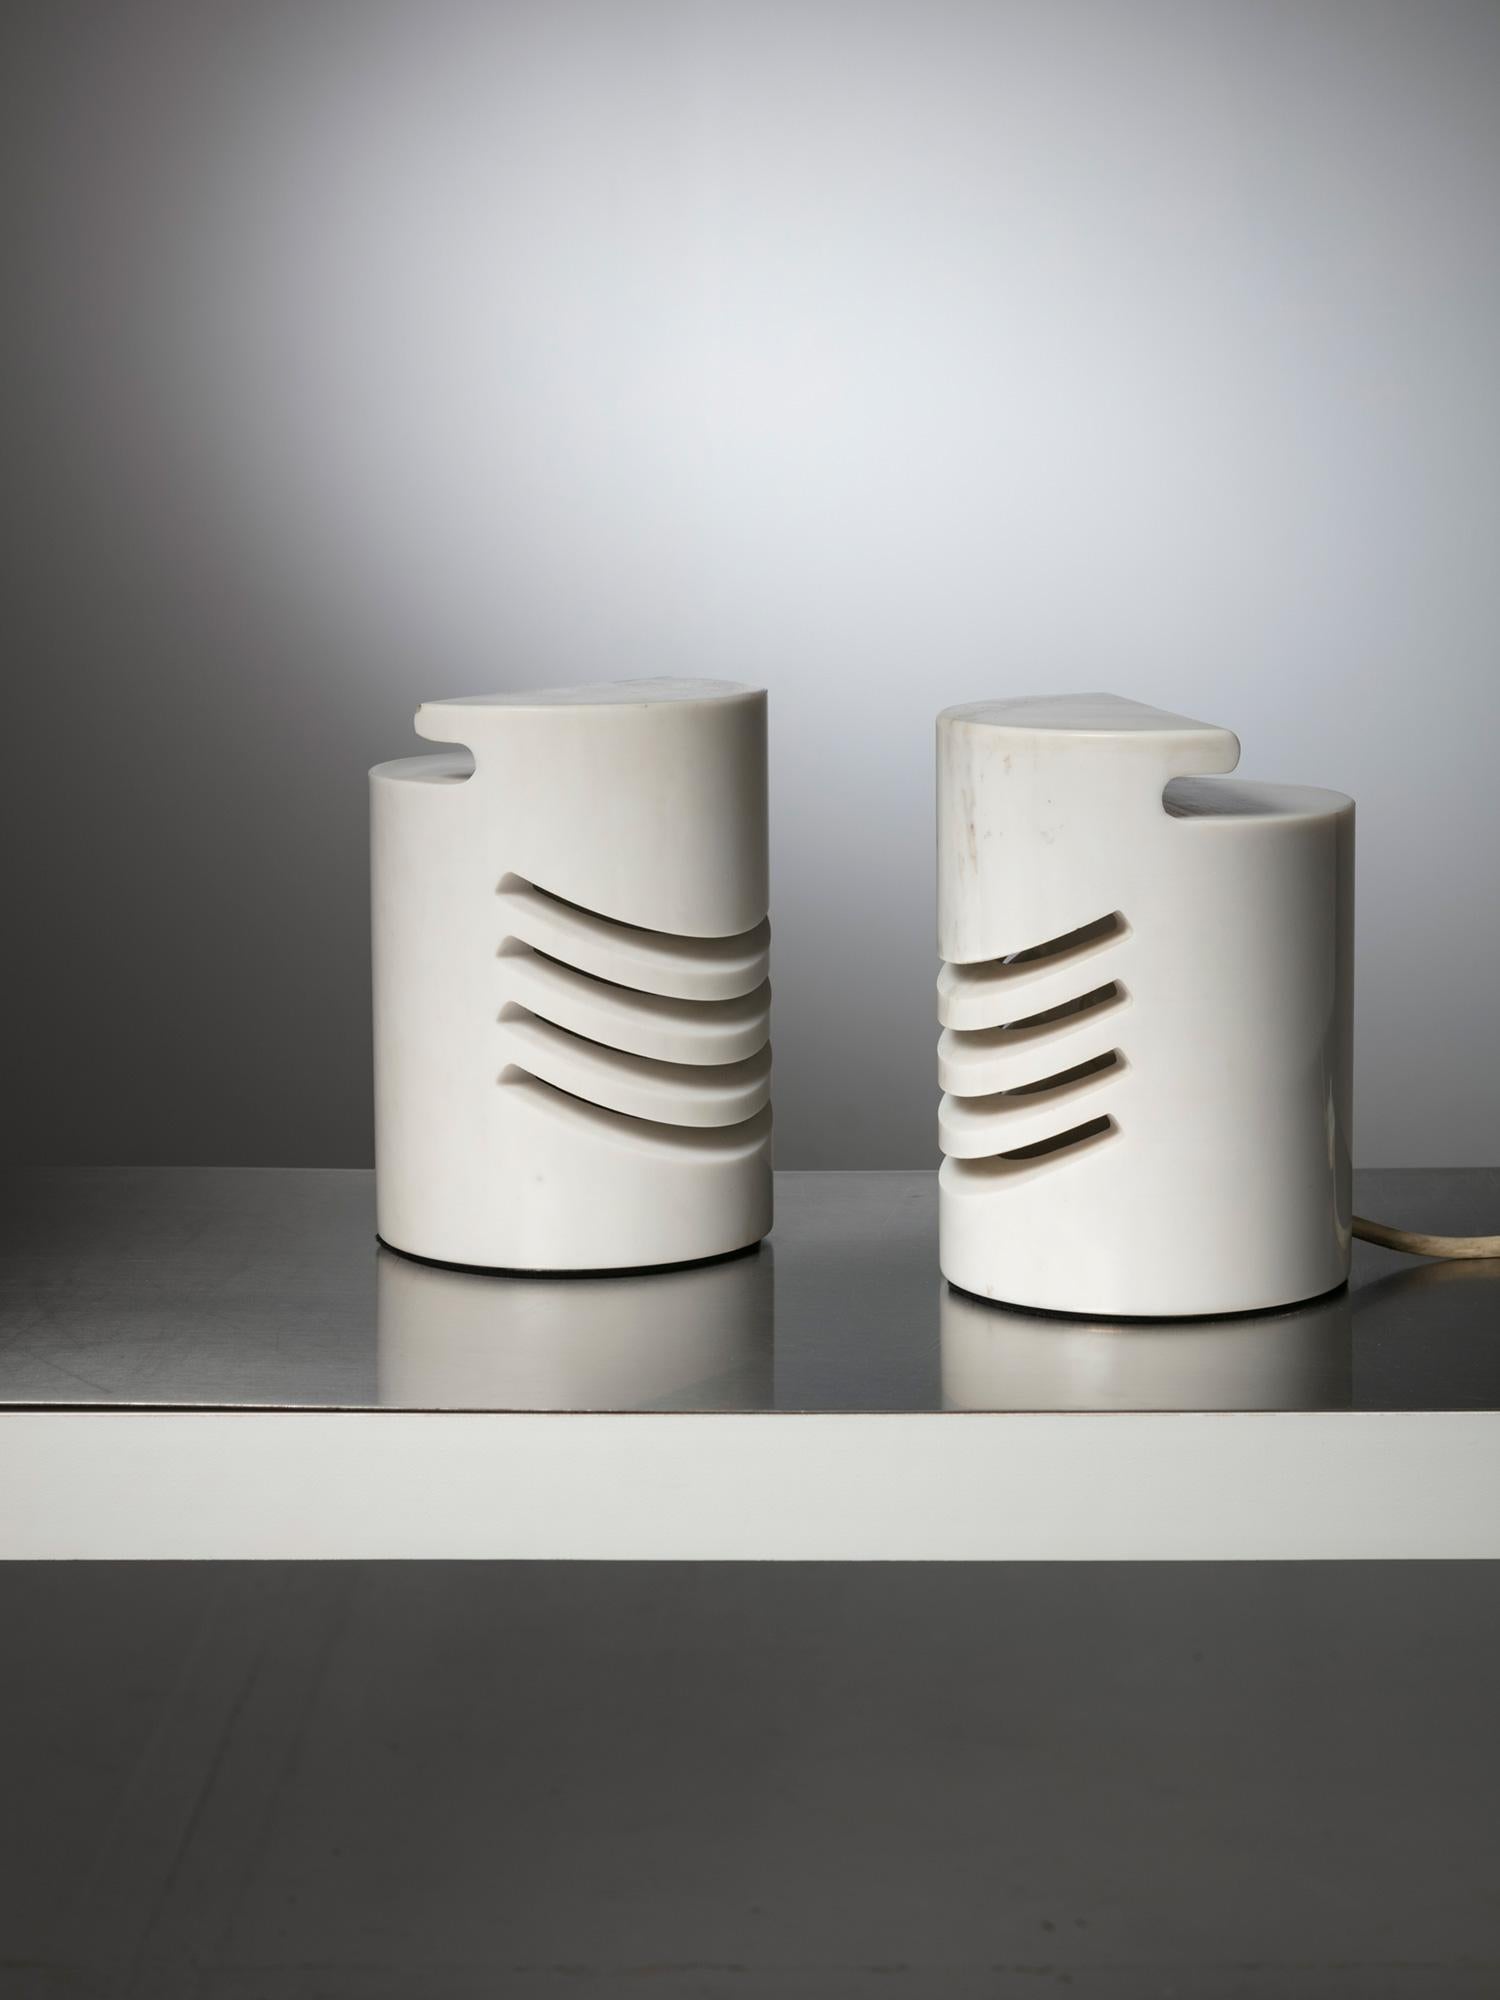 Rare set of two Maris table lamps by Glauco e Roberto Gresleri for Sirrah.
Solid Carrara marble blocks carved to obtain a frontal grid and a hand grip to easily move the pieces.